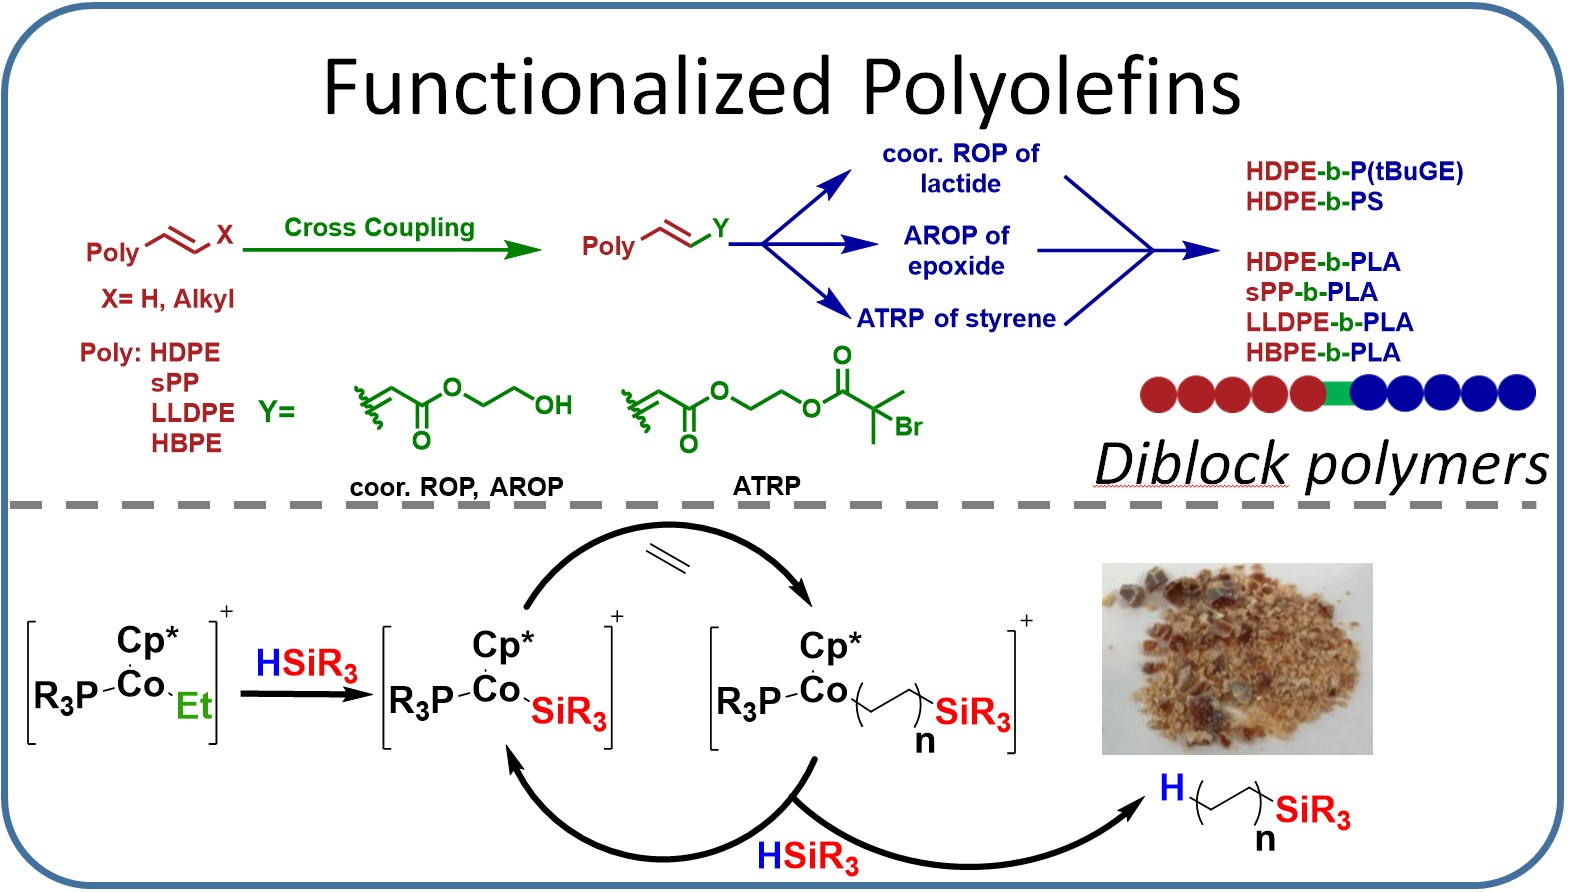 The incorporation of polar groups into industrially relevant polyolefins is challenging due to their incompatible chemistries, to circumvent this issue we have developed two approaches. The first one consists of combining a postpolymerization functionalization strategy with subsequent polar monomer polymerization to enable the facile synthesis of a wide multitude of polyolefin containing polar block copolymers. The second approach uses silanes as chain transfer agents, which allows the incorporation of non-polymerizable polar groups to produce semi-telechelic polyolefins.